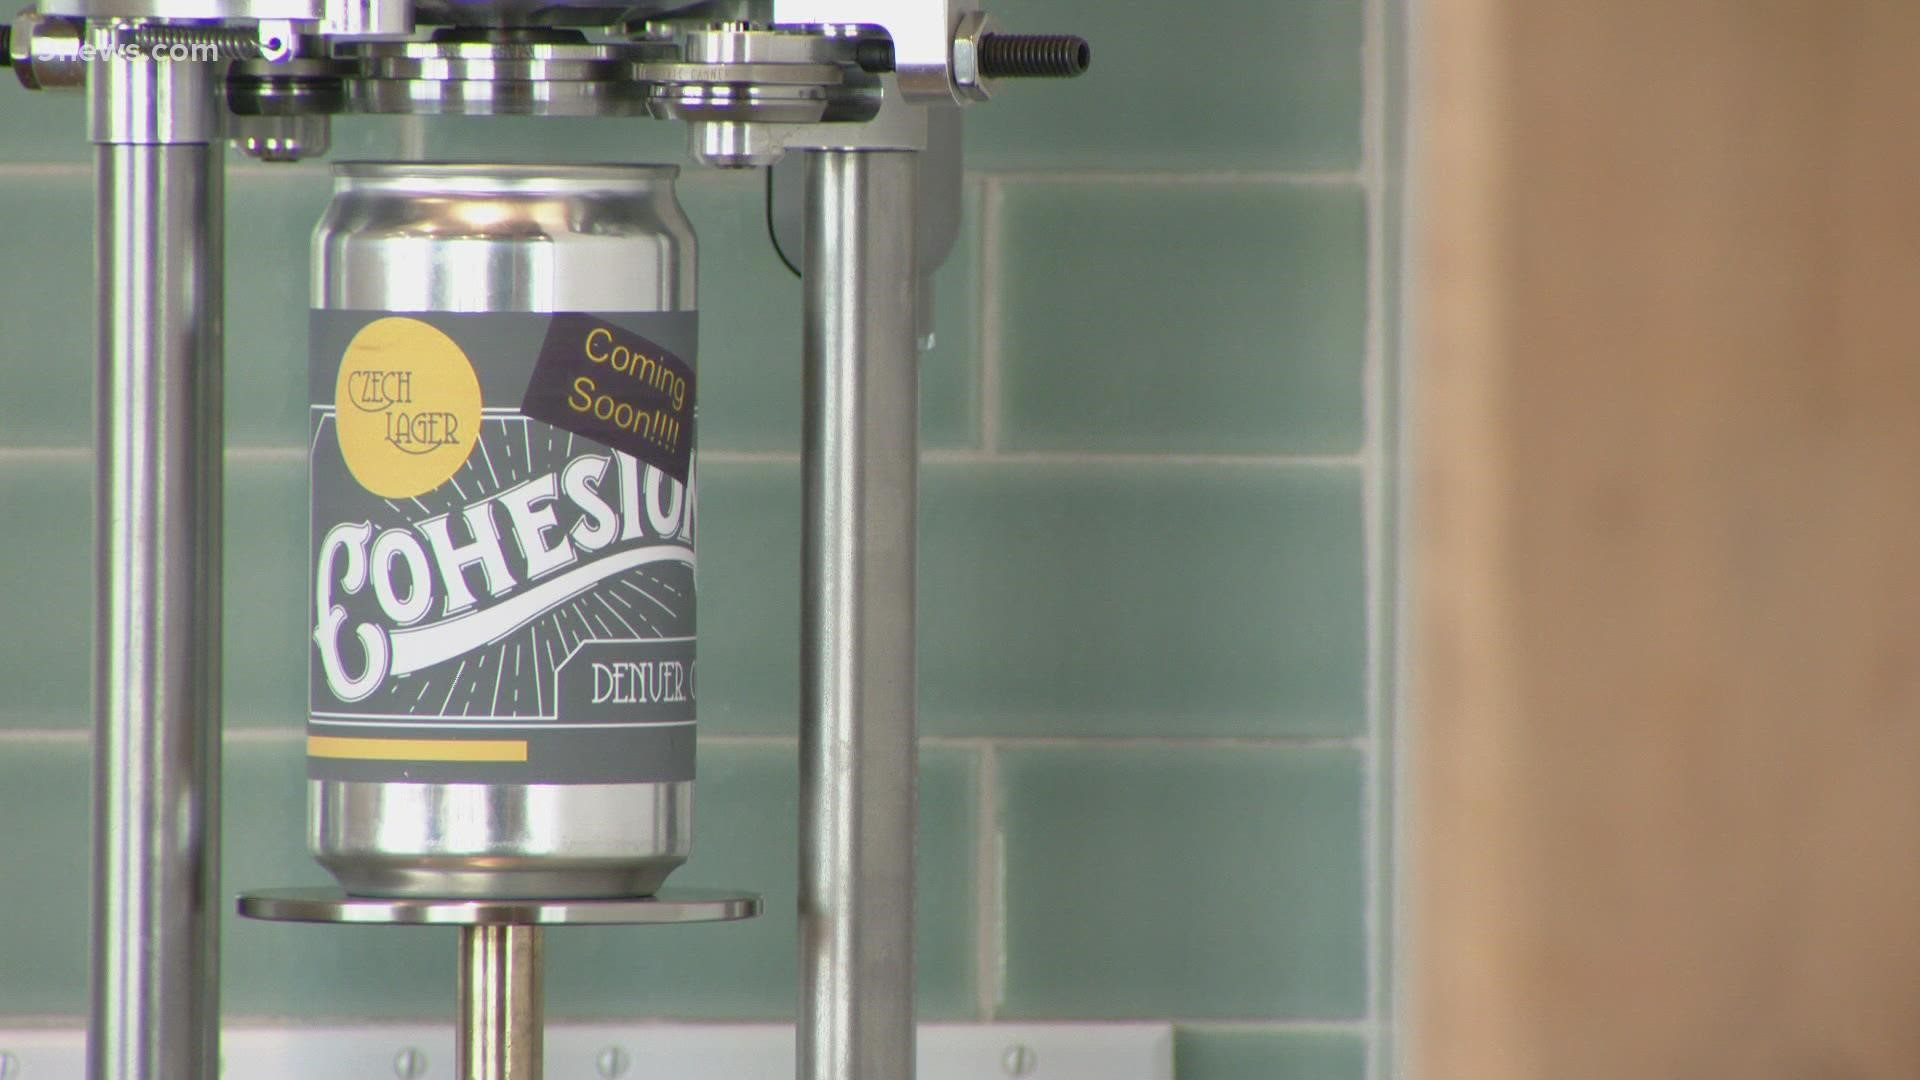 Cohesion Brewery near 38th and York serves up Czech-style lagers with the purpose of connecting community members from different backgrounds.